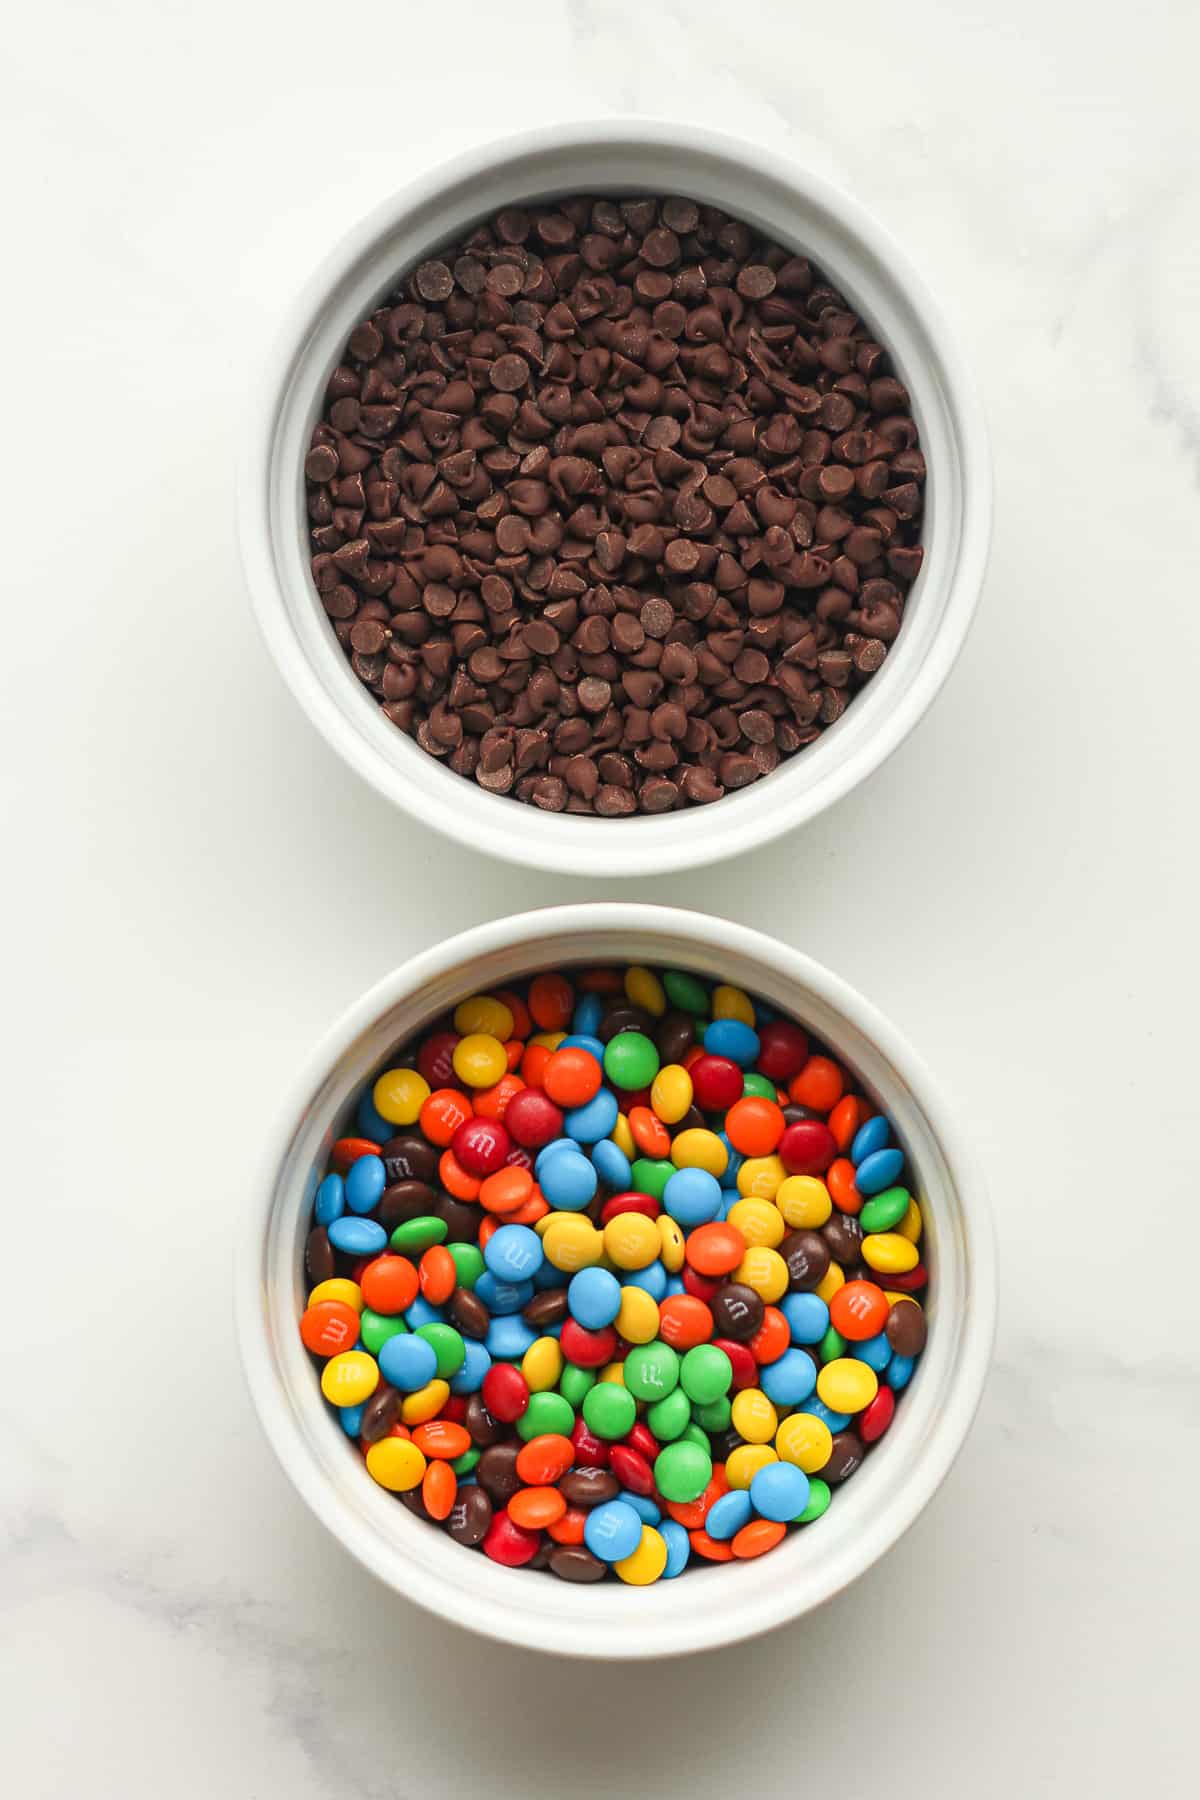 Bowls of the mini chocolate chips and the mini m&ms.